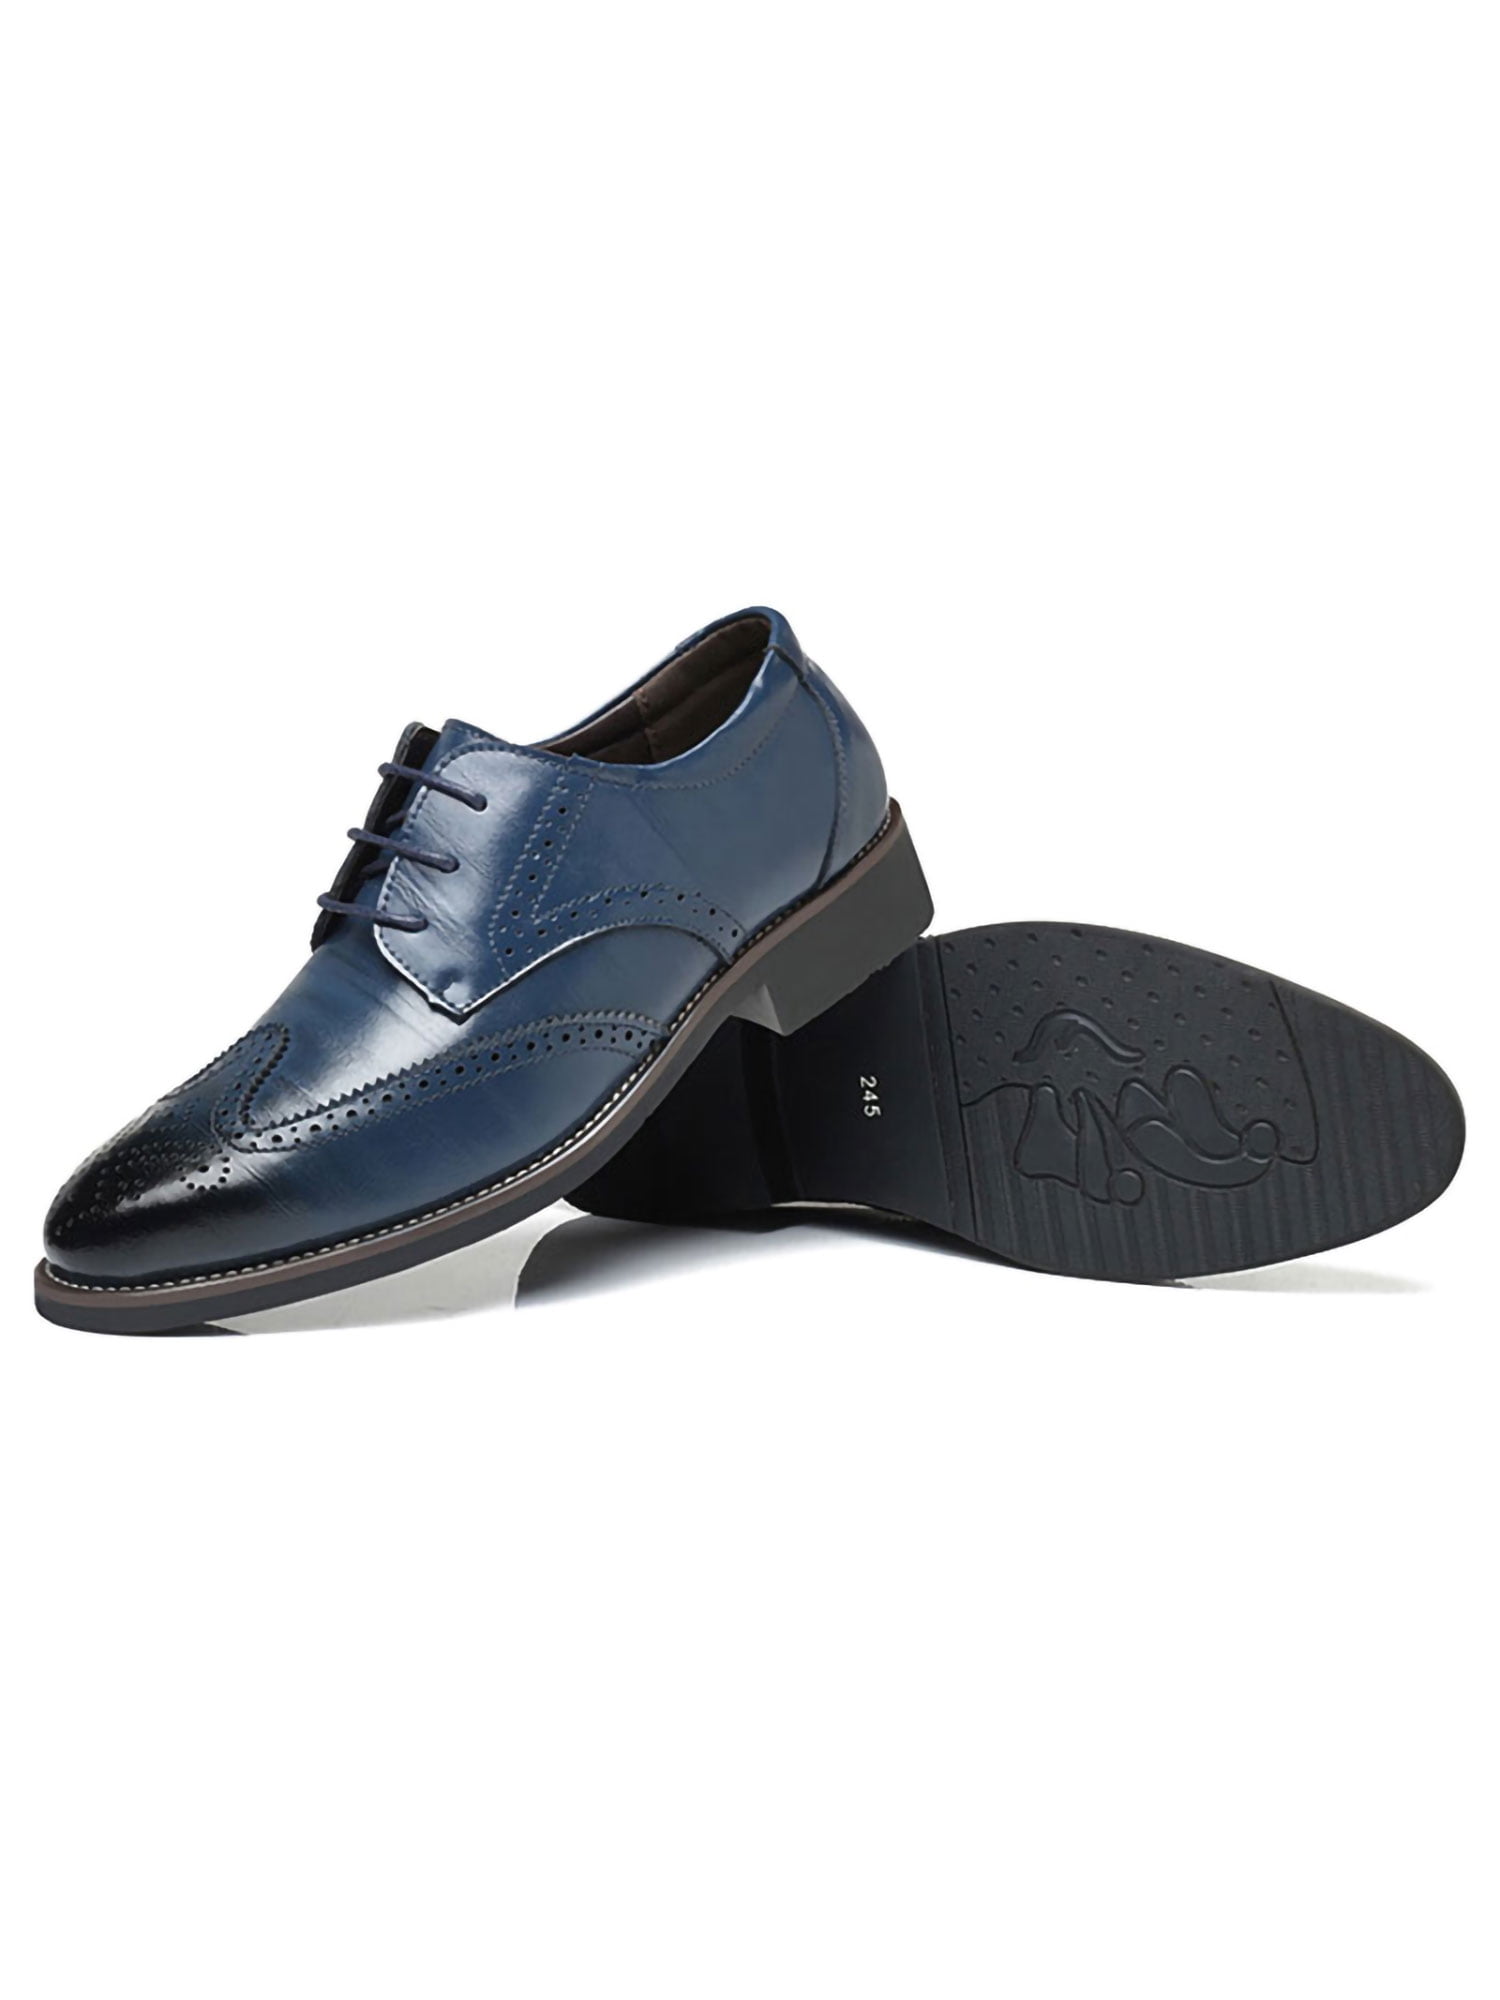 Details about   Mens Leather Slip On Loafers Dress Formal Business Casual Shoes Oxfords Fashion